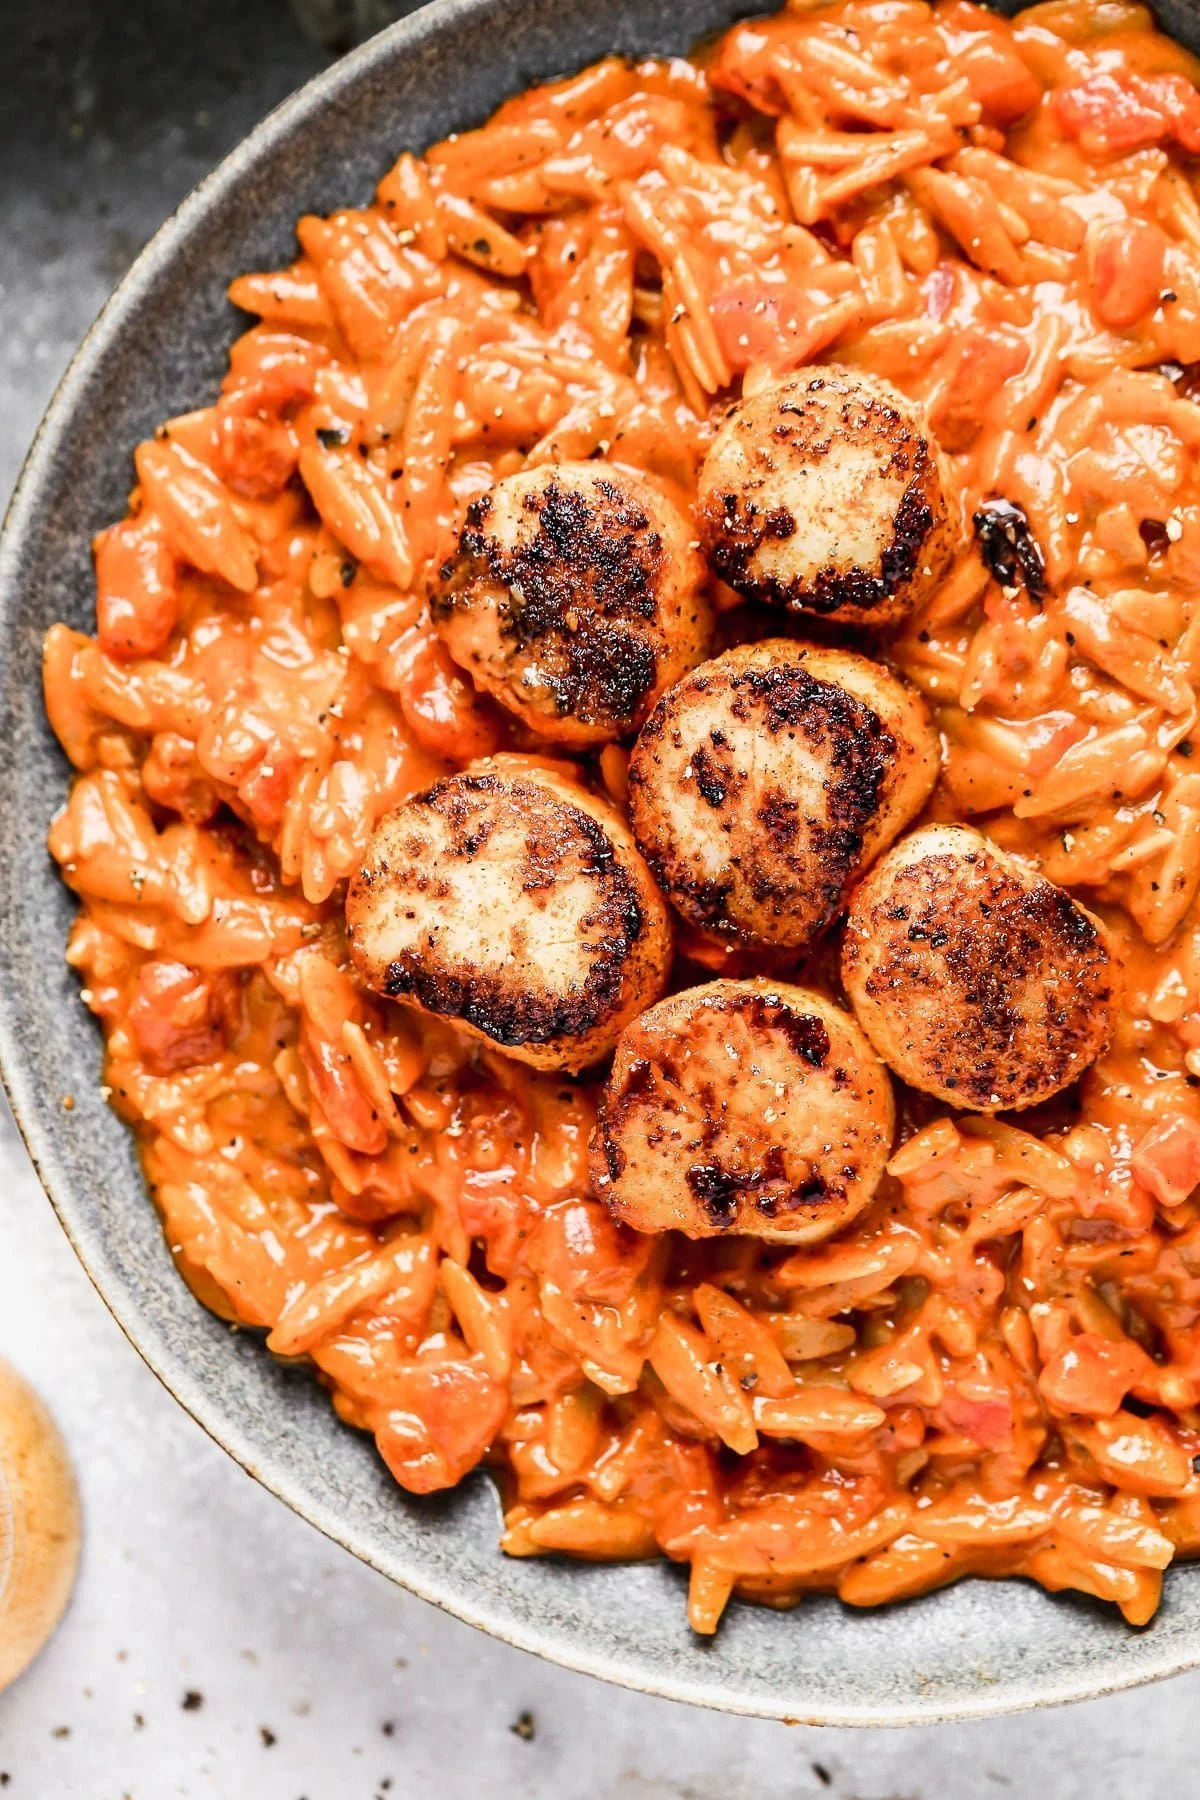 Our Buttery Tomato Orzo with Blackened Scallops has all of the creaminess of a traditional risotto, but is made a little bit healthier with the addition of whole-wheat orzo. It's packed with luscious tomato flavor rivaling the most perfect marinara and hints of nutty brown butter, making it my current favorite thing to eat. We serve ours with perfectly seared blackened scallops, but the protein of choice is up to you. 